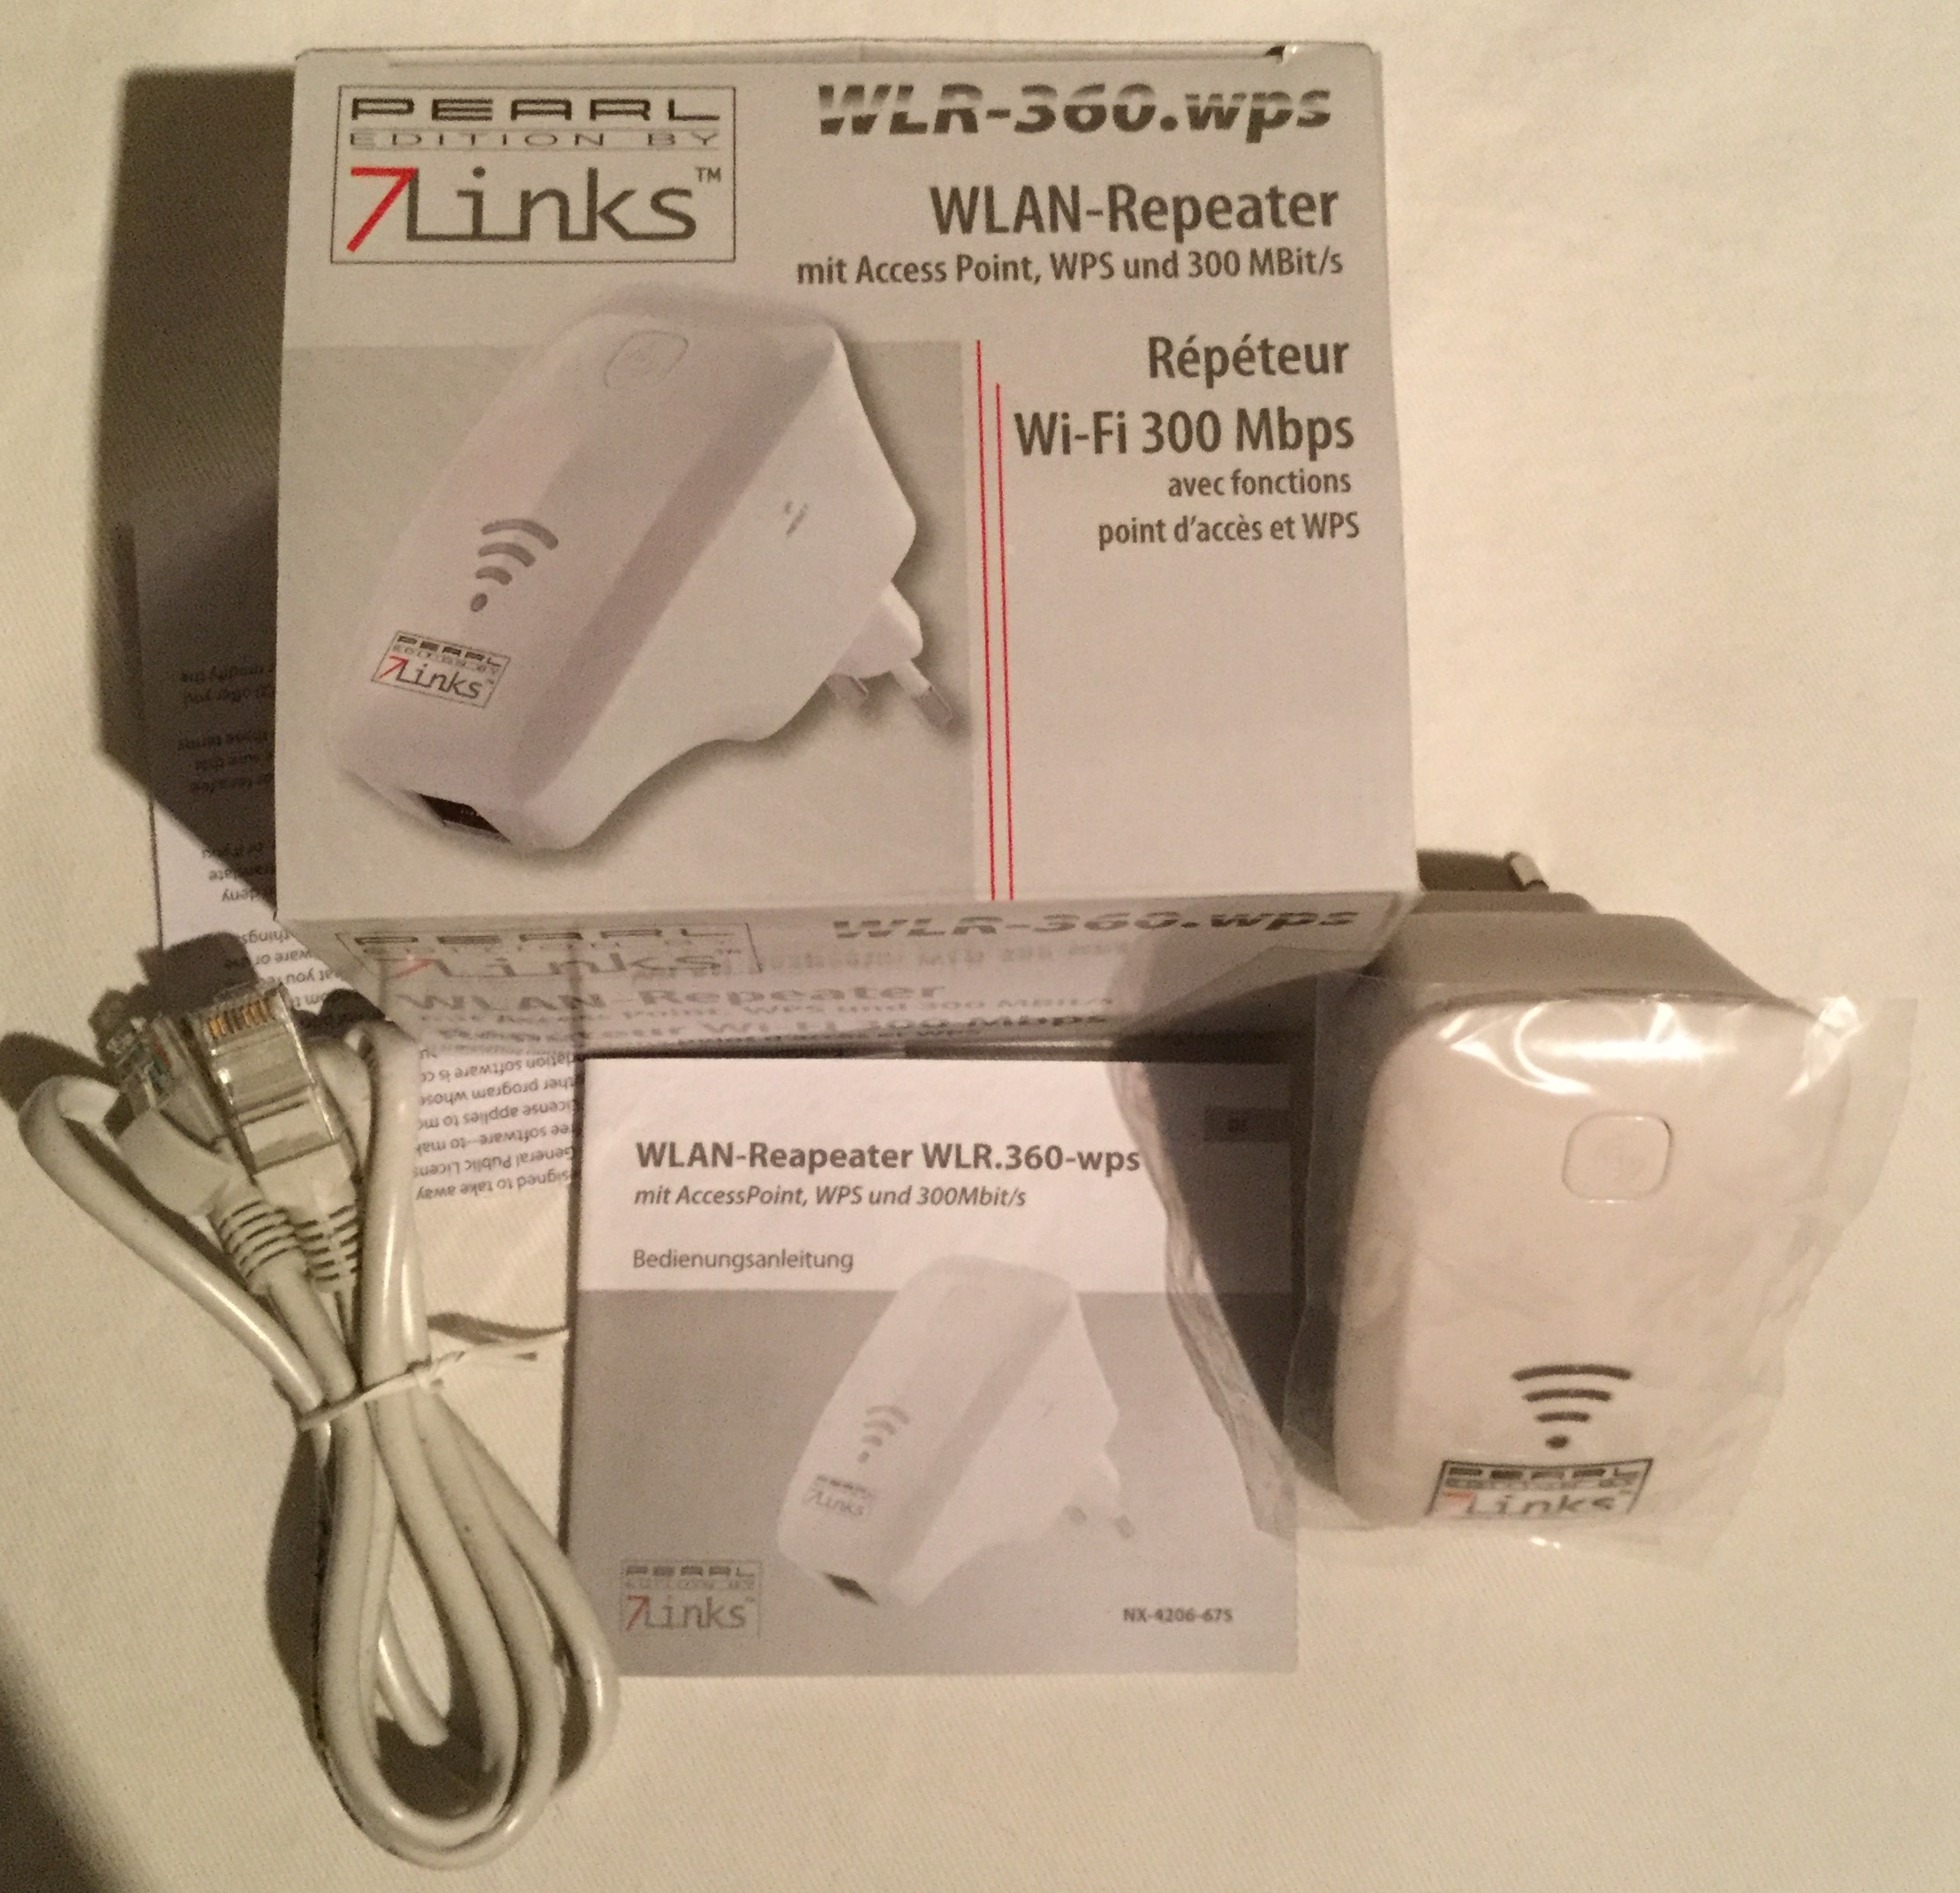 7Links WLR-360.wps WLAN-Repeater im Test